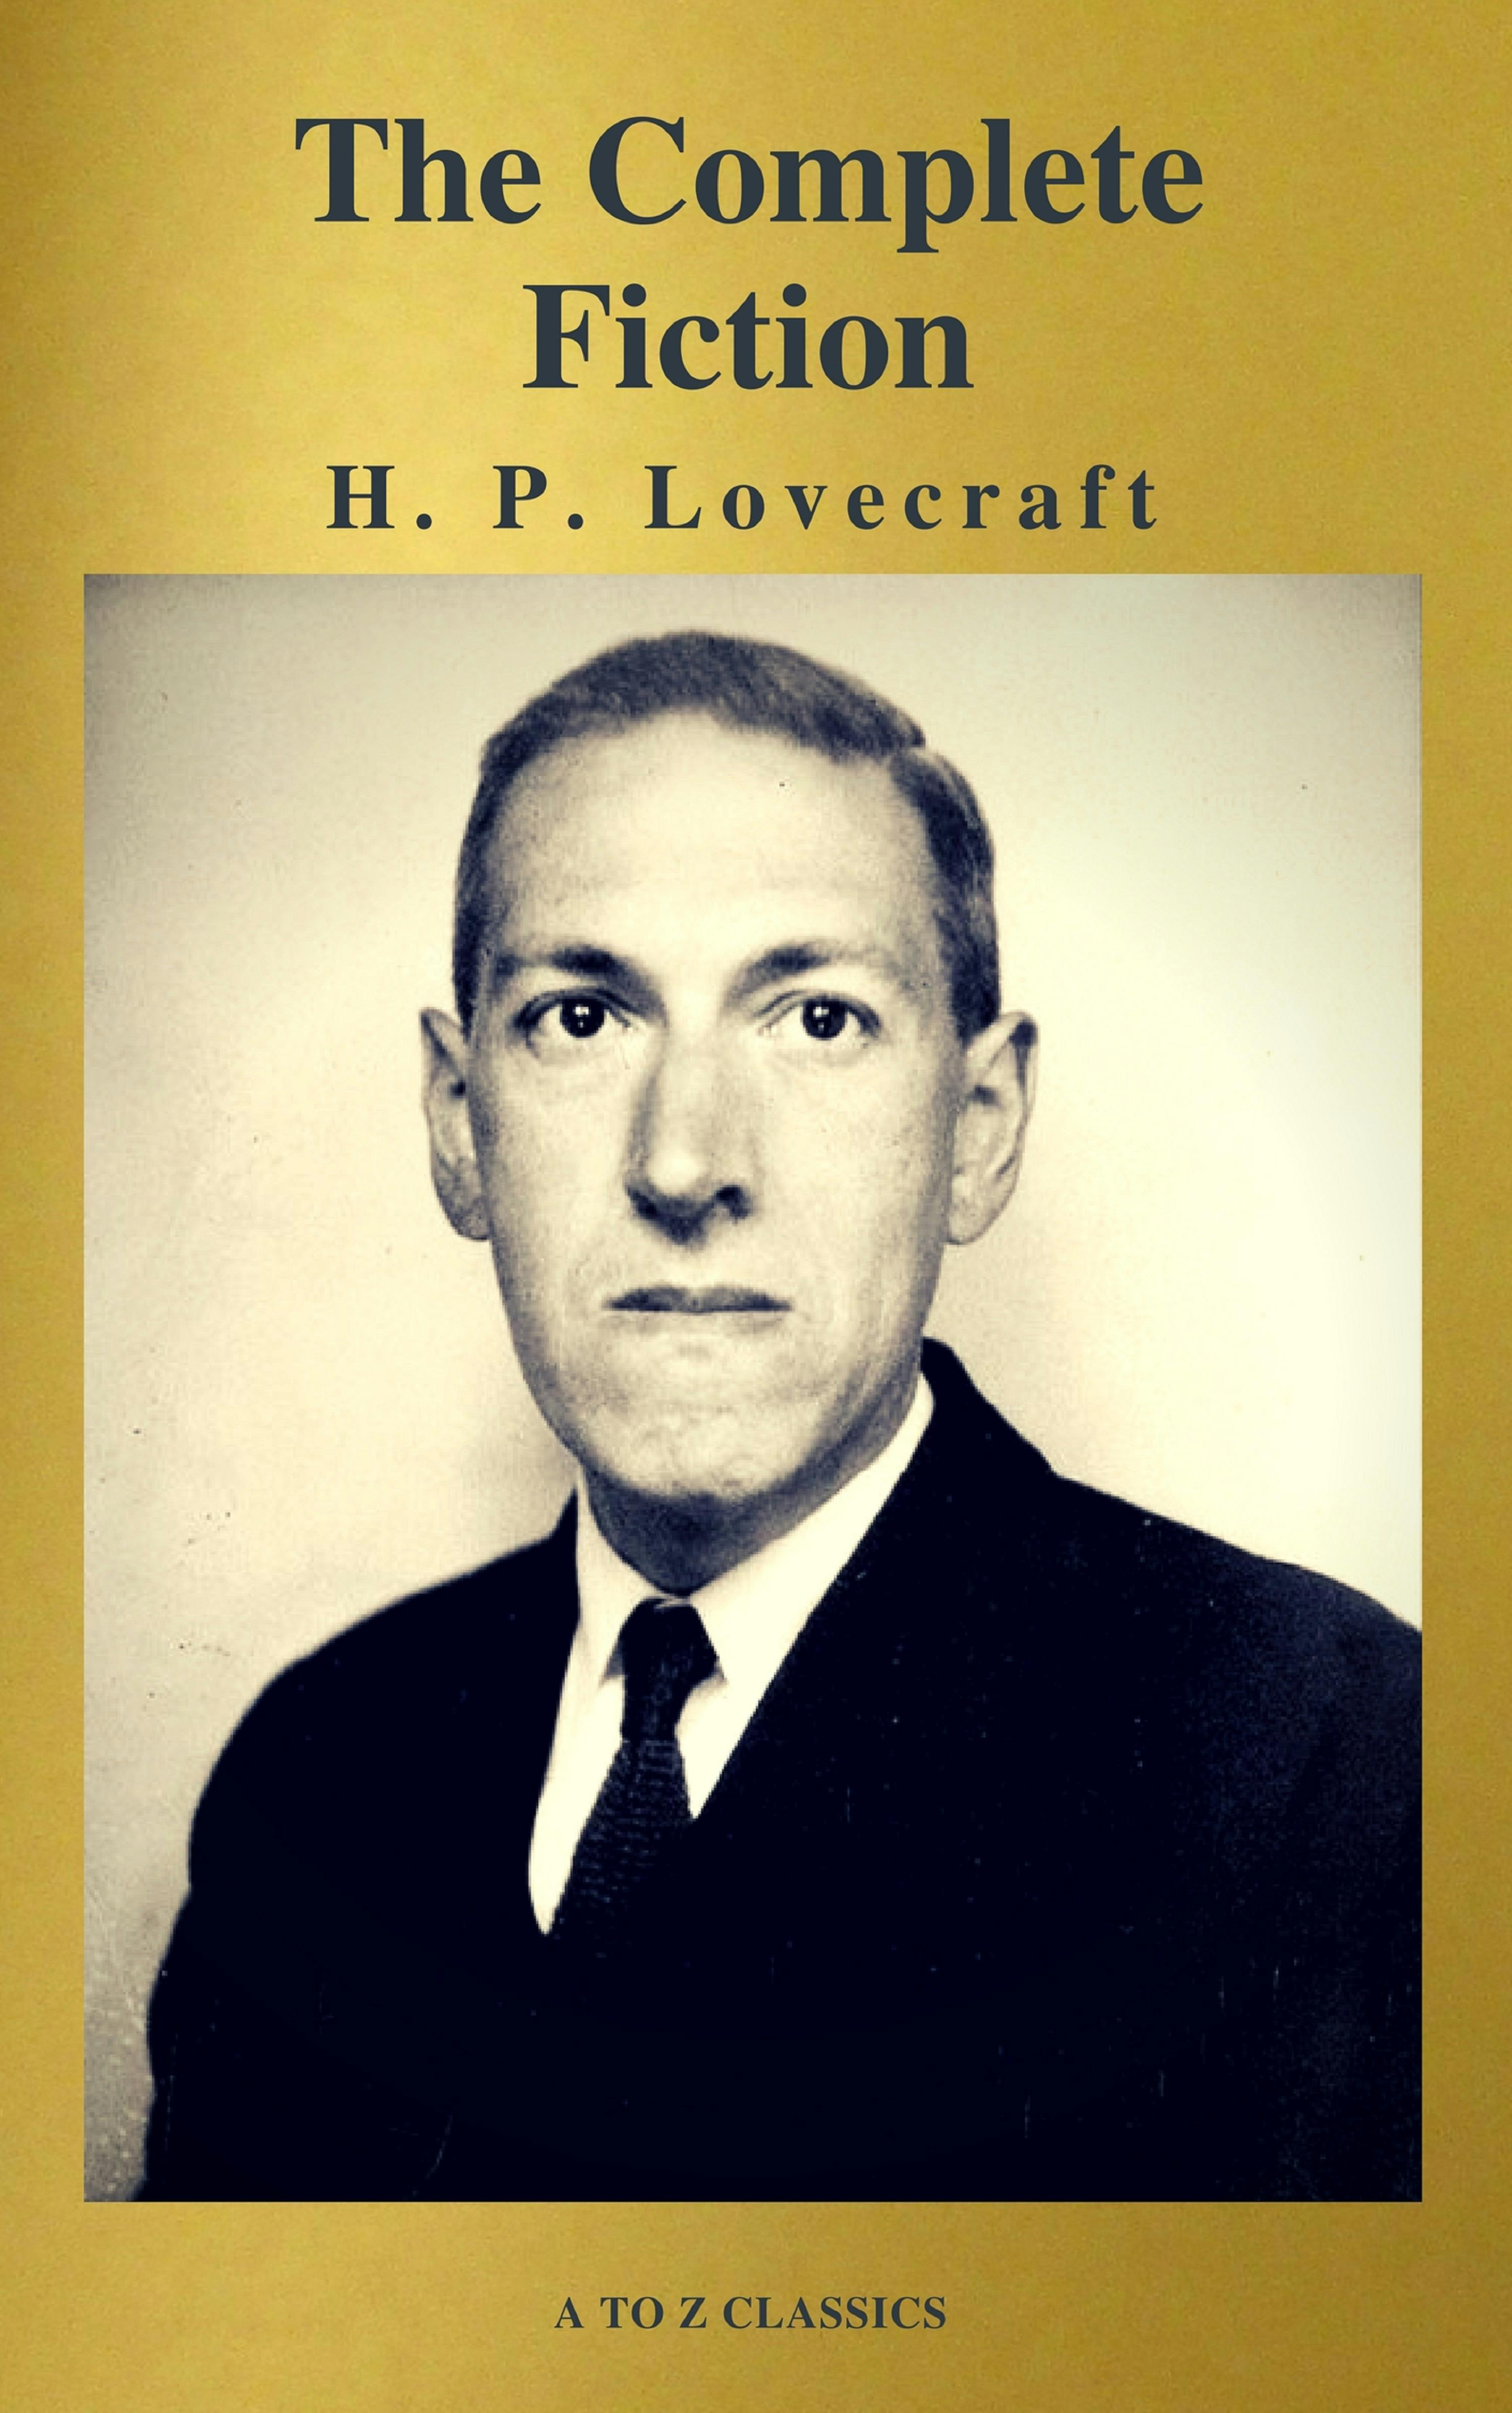 H. P. Lovecraft: The Complete Fiction - A to ZClassics, H. P. Lovecraft